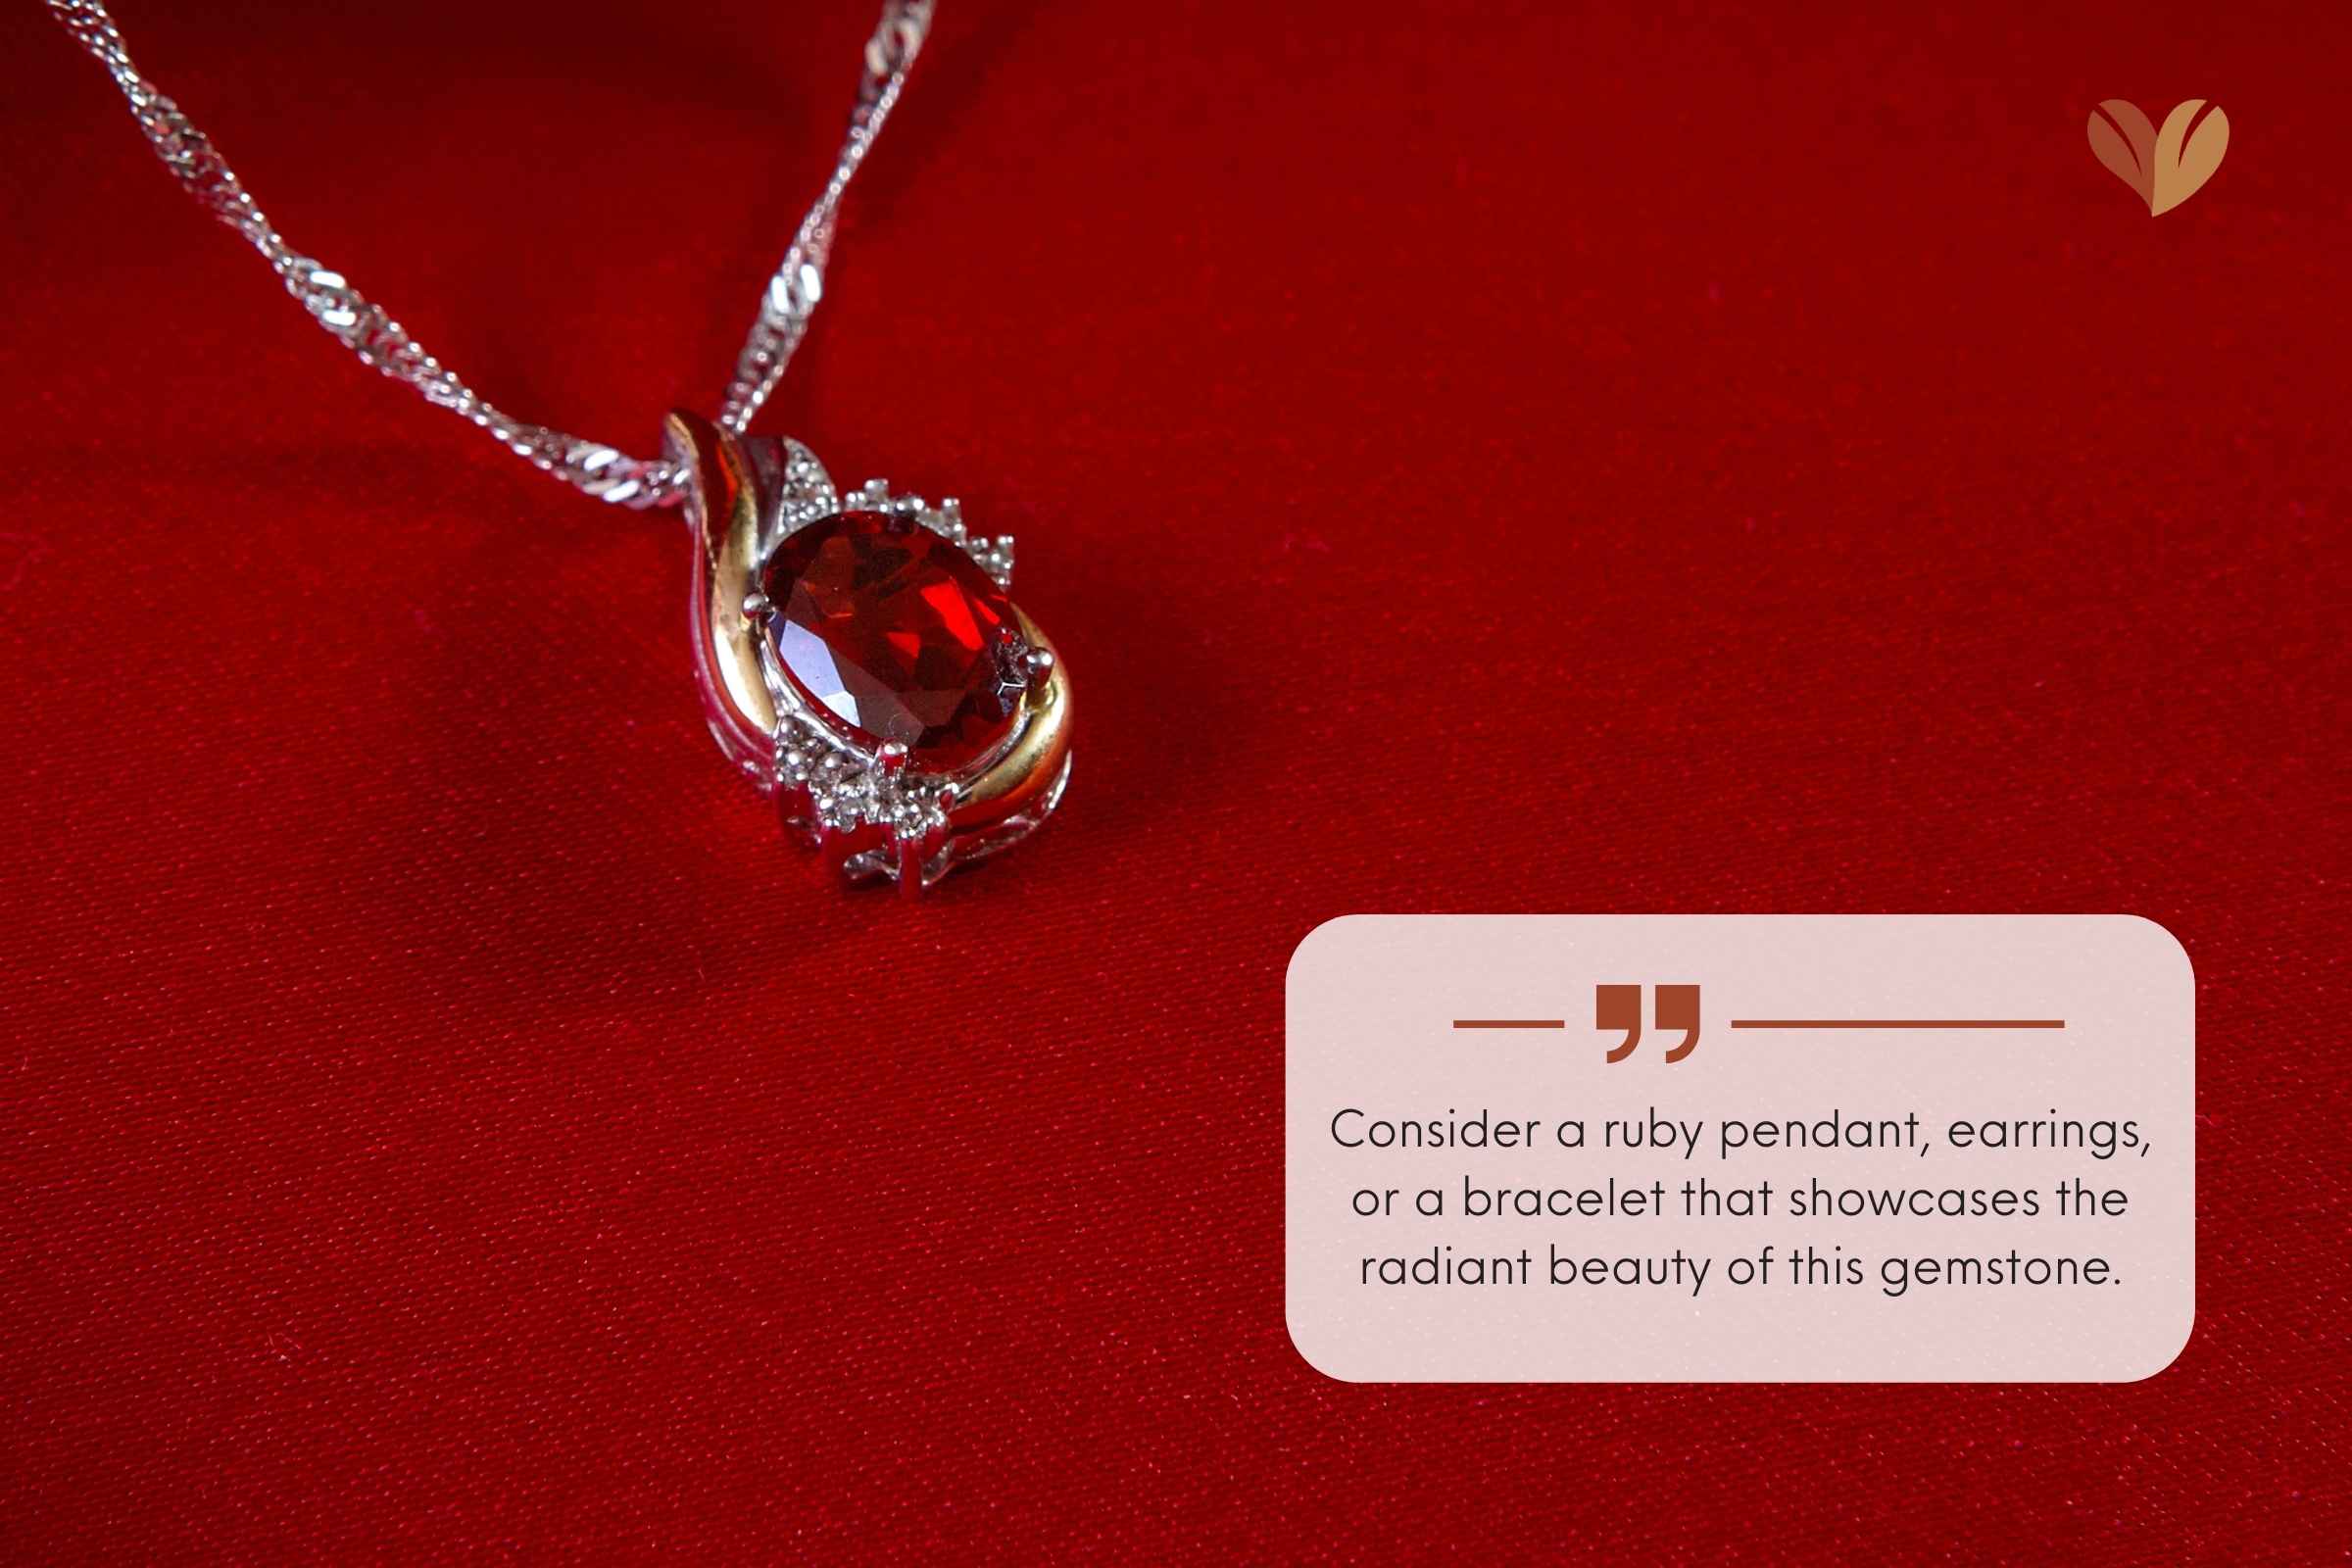 A ruby pendant that showcases the radiant beauty